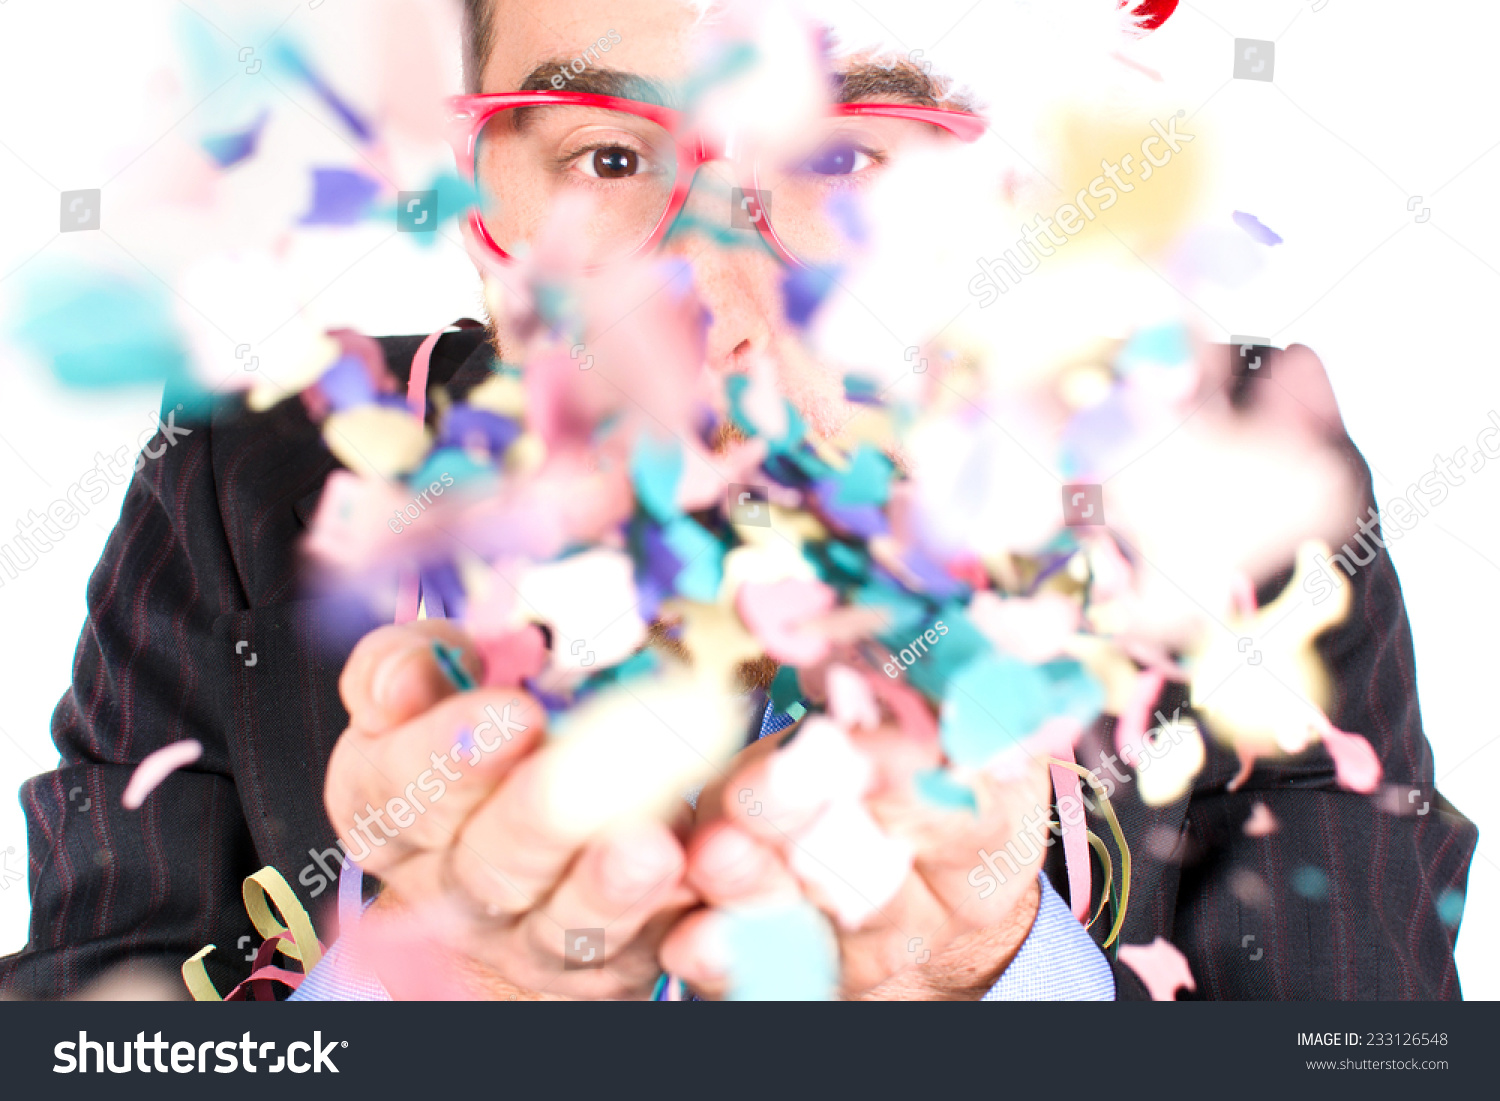 Young man blowing confetti #233126548